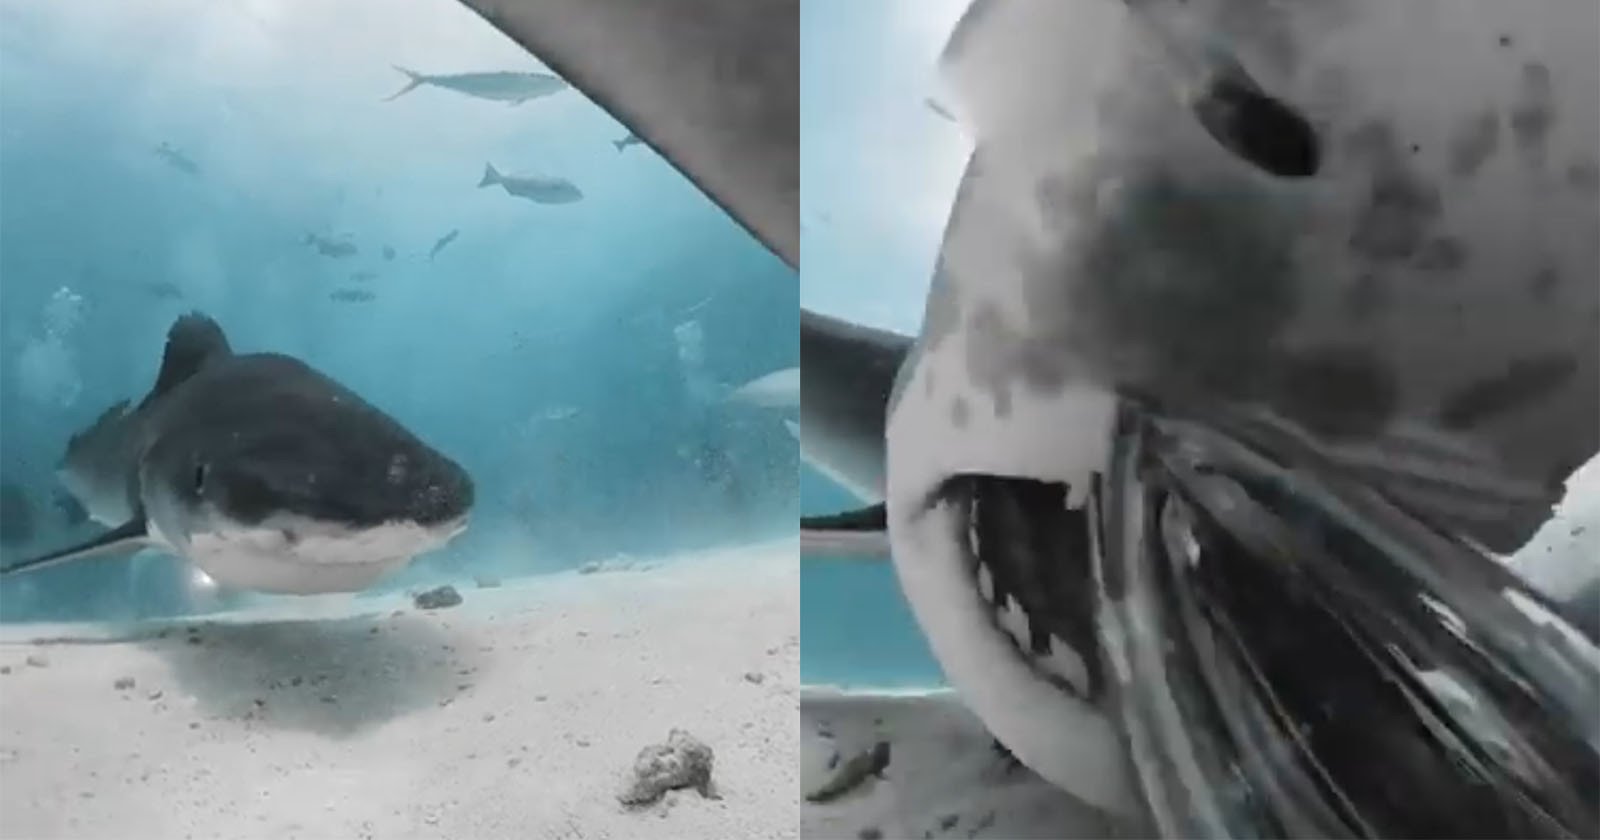  shark gobbles camera captures what looks like get 